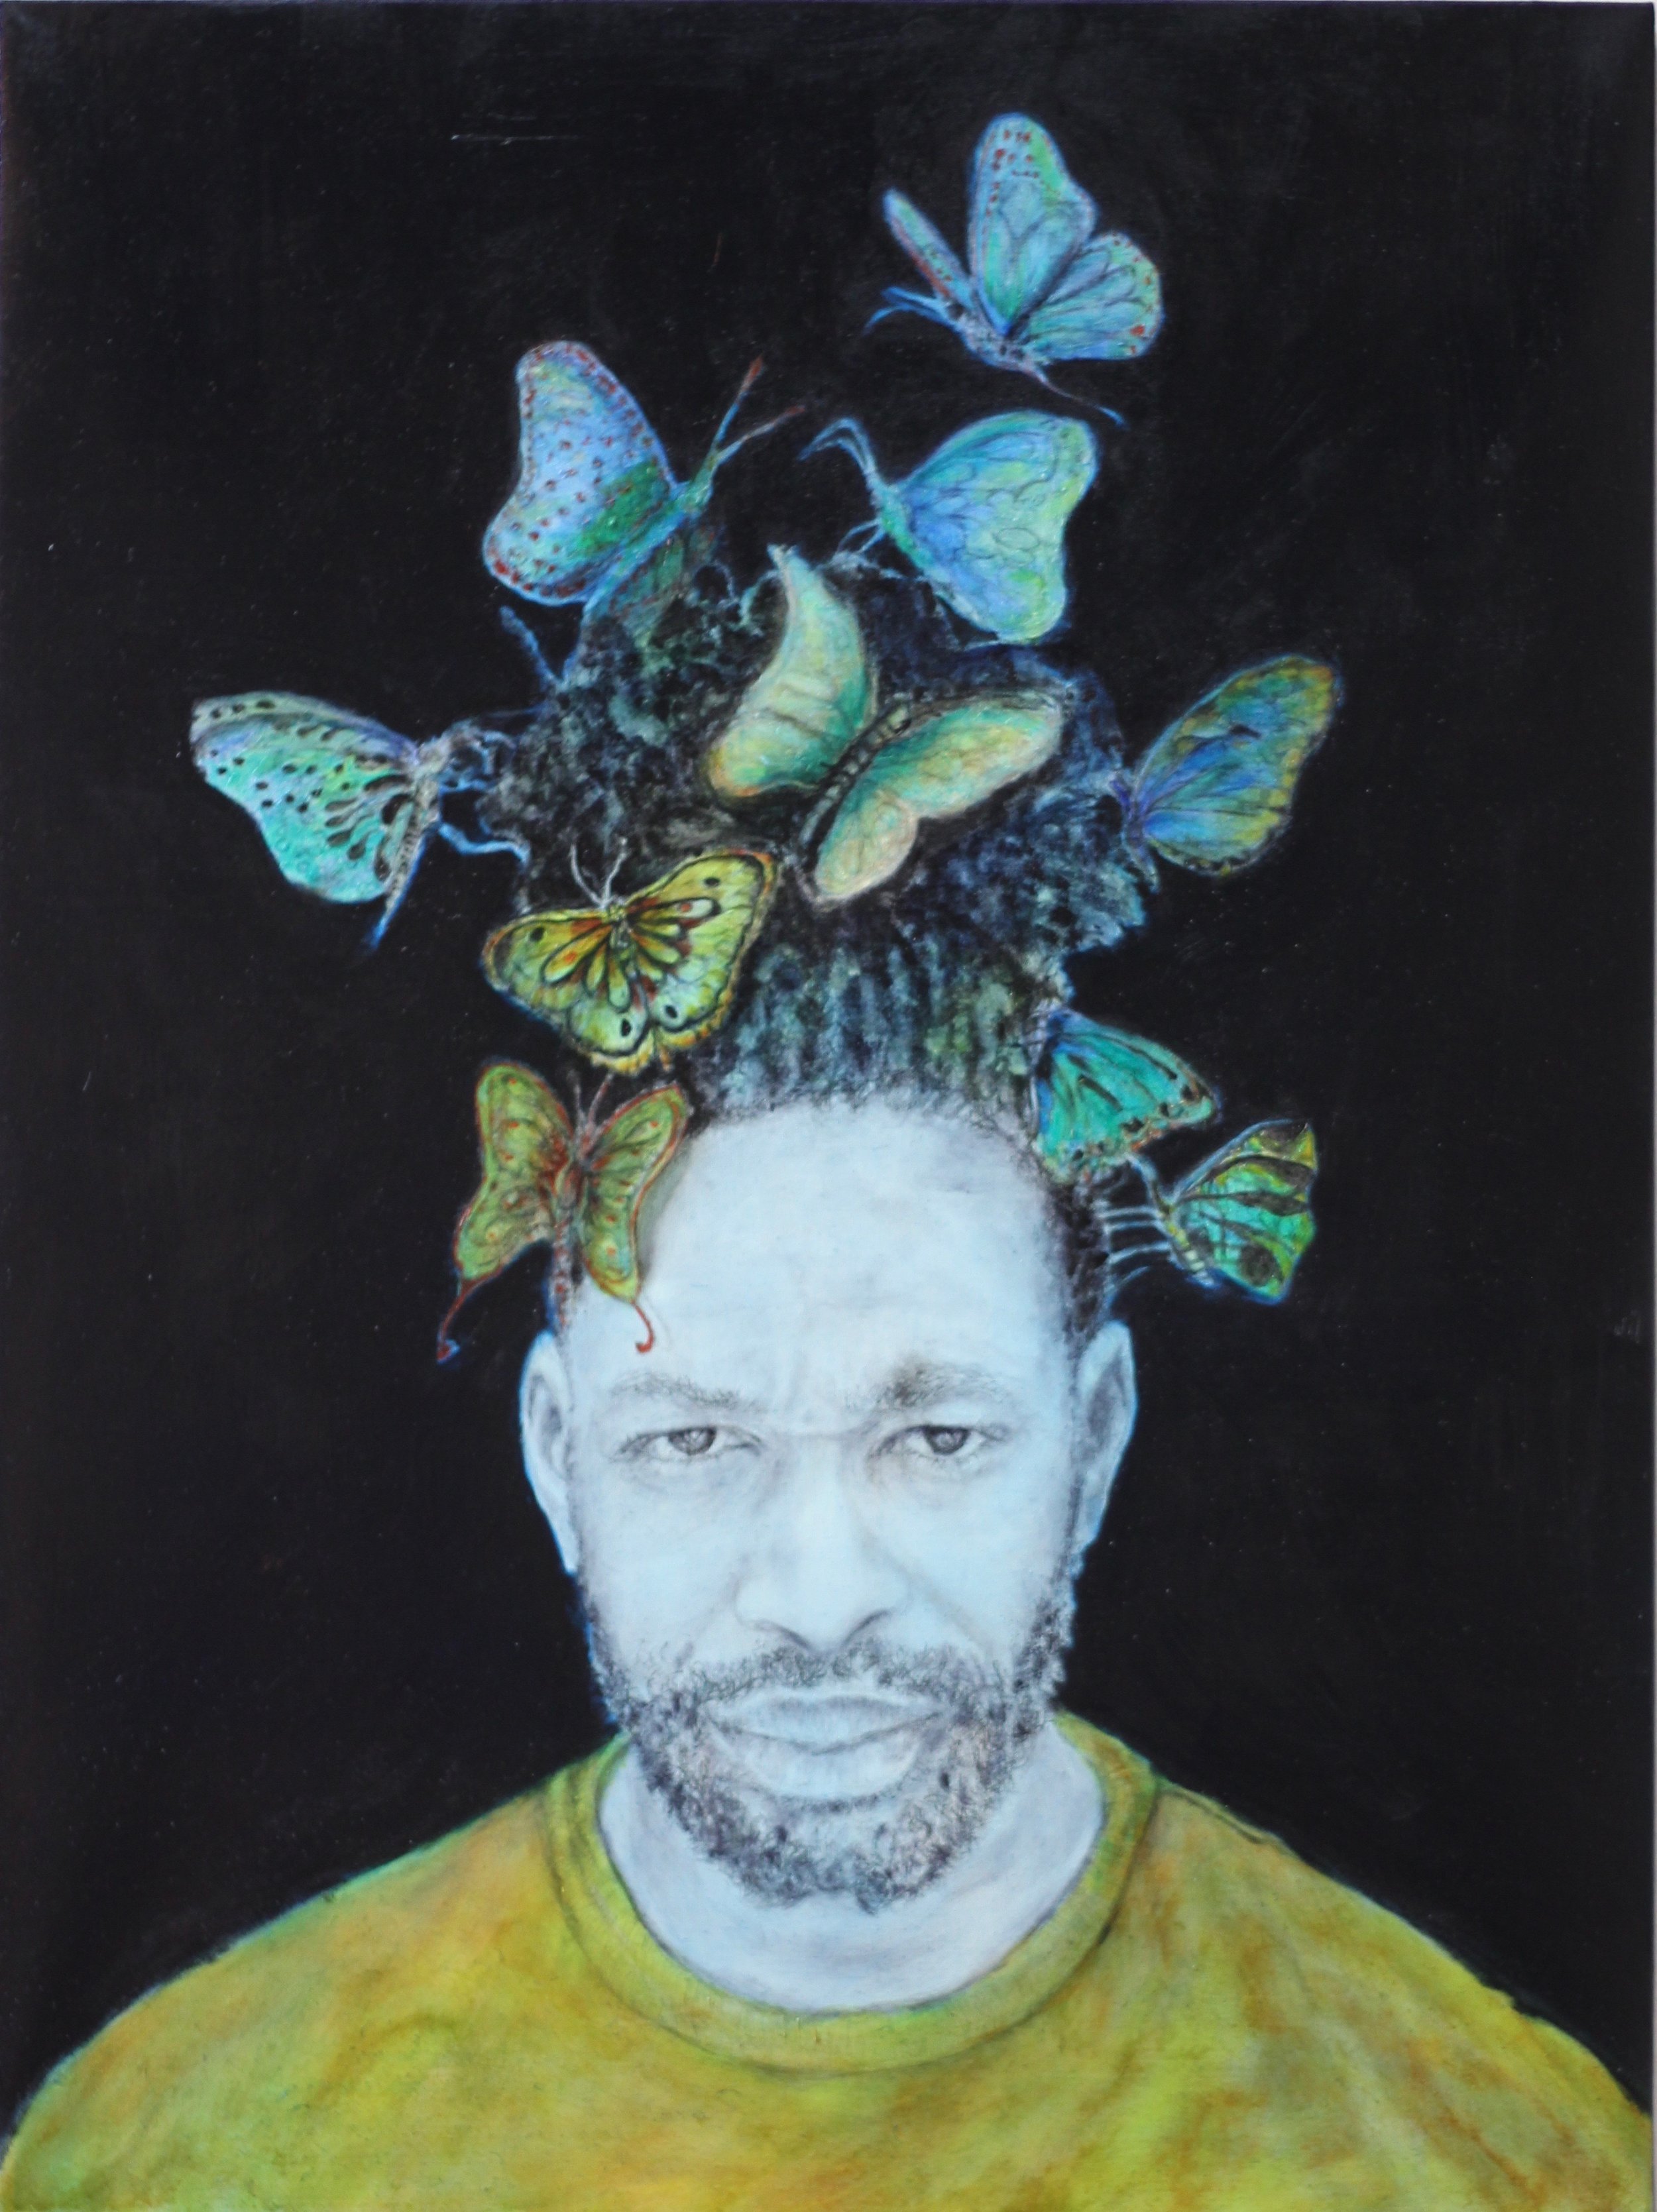 "Of Human Survival - Plight of the Butterflies", 28"x24", charcoal, graphite and oil on canvas on woodboard, 2018.